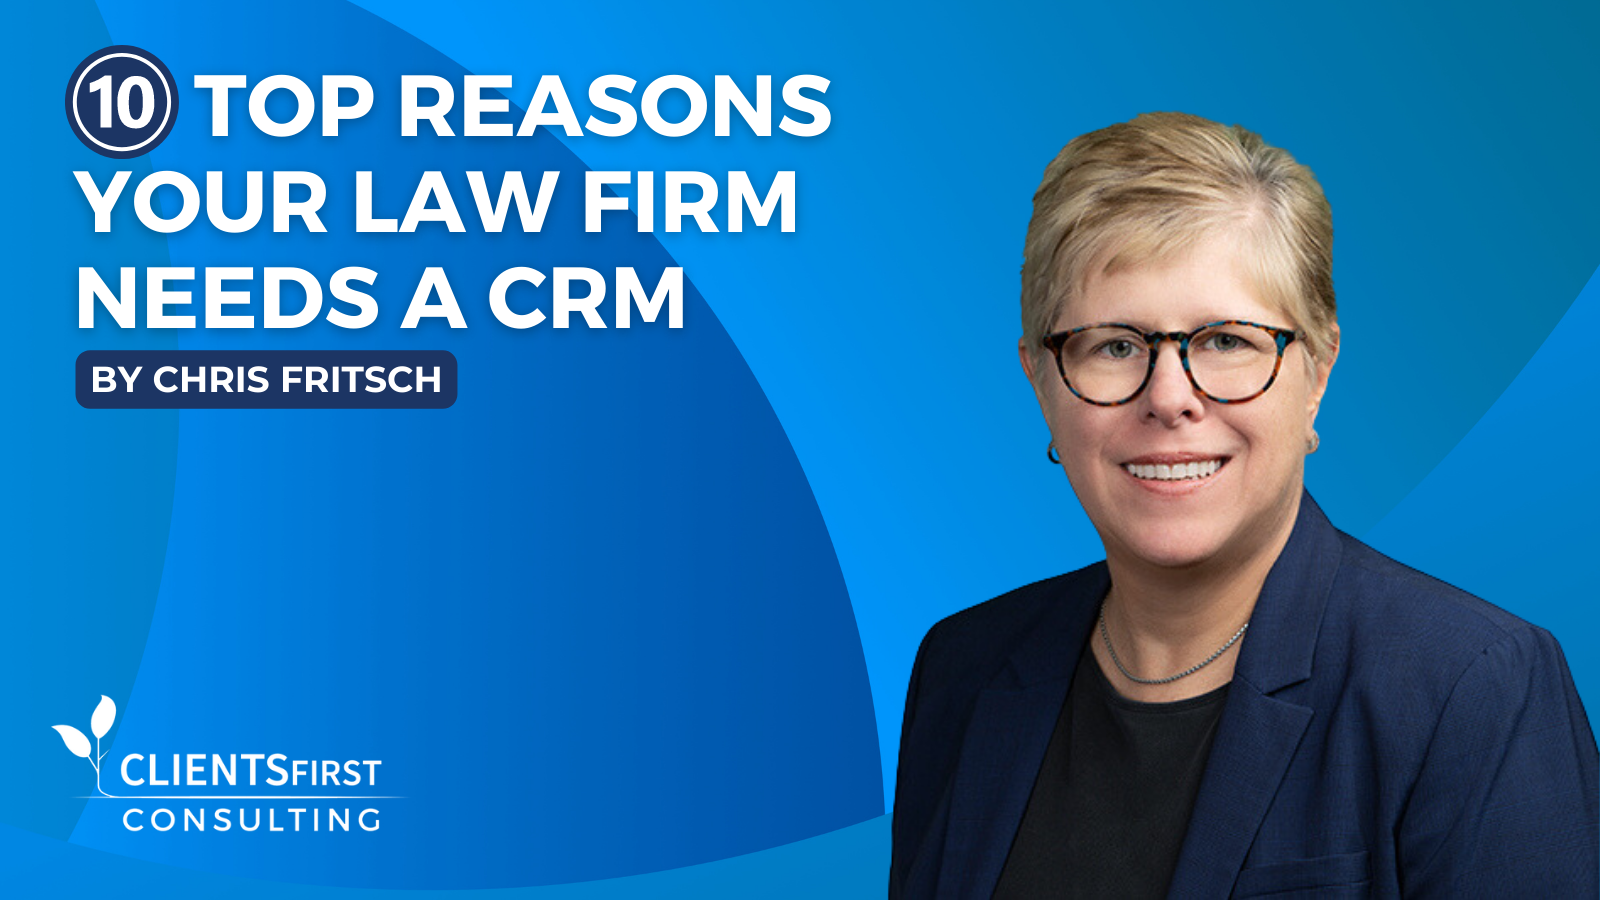 10 Top Reasons Your Law Firm Needs A CRM